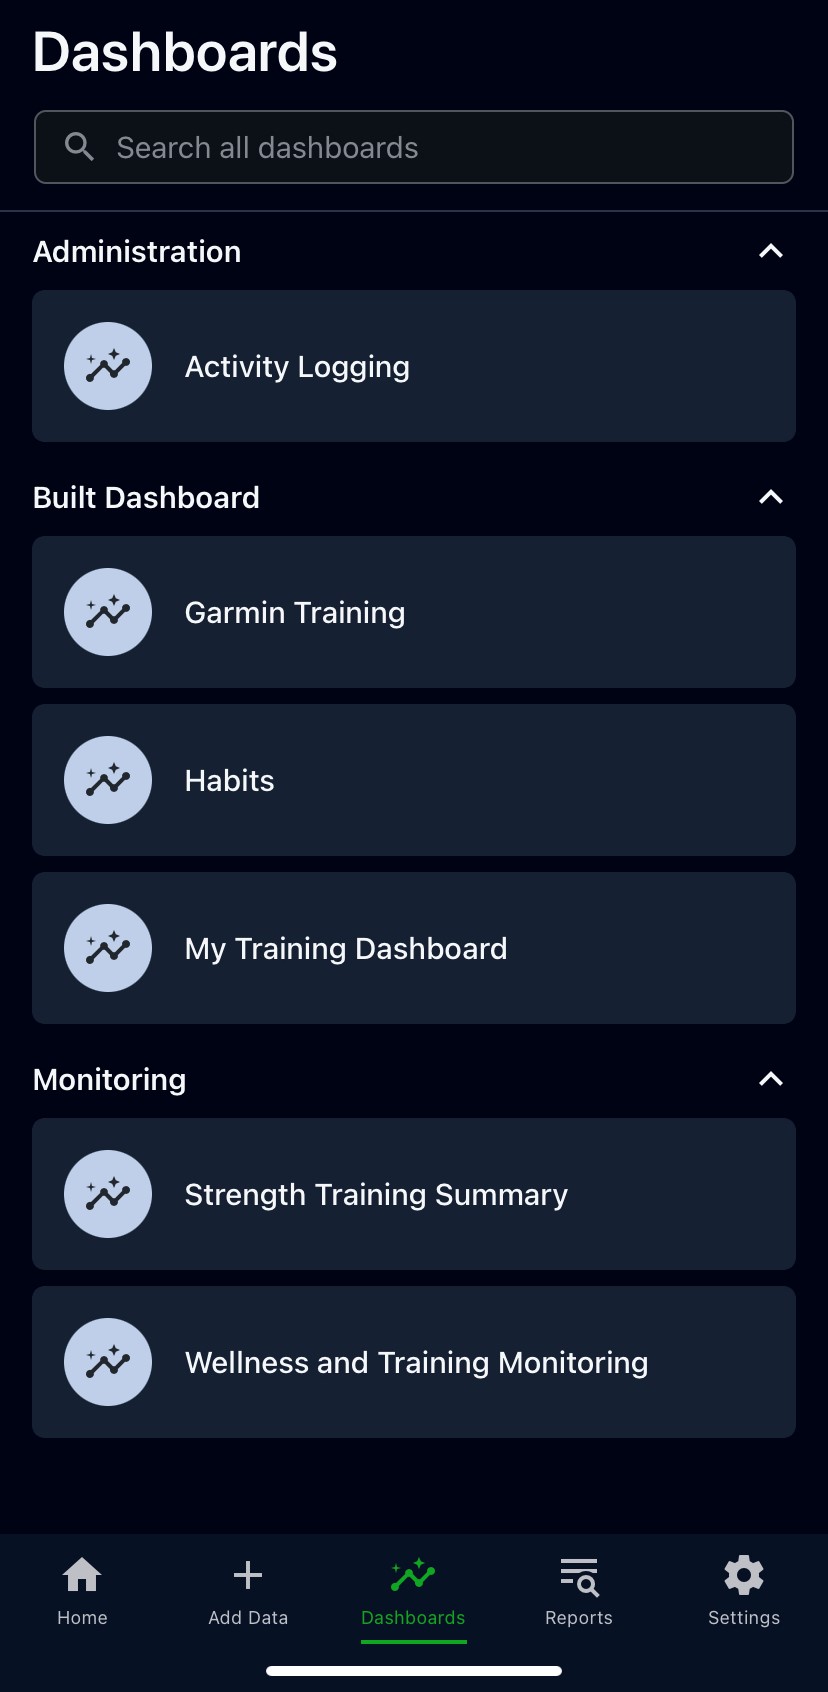 A screenshot of the Dashboards tab in the Smartabase app.